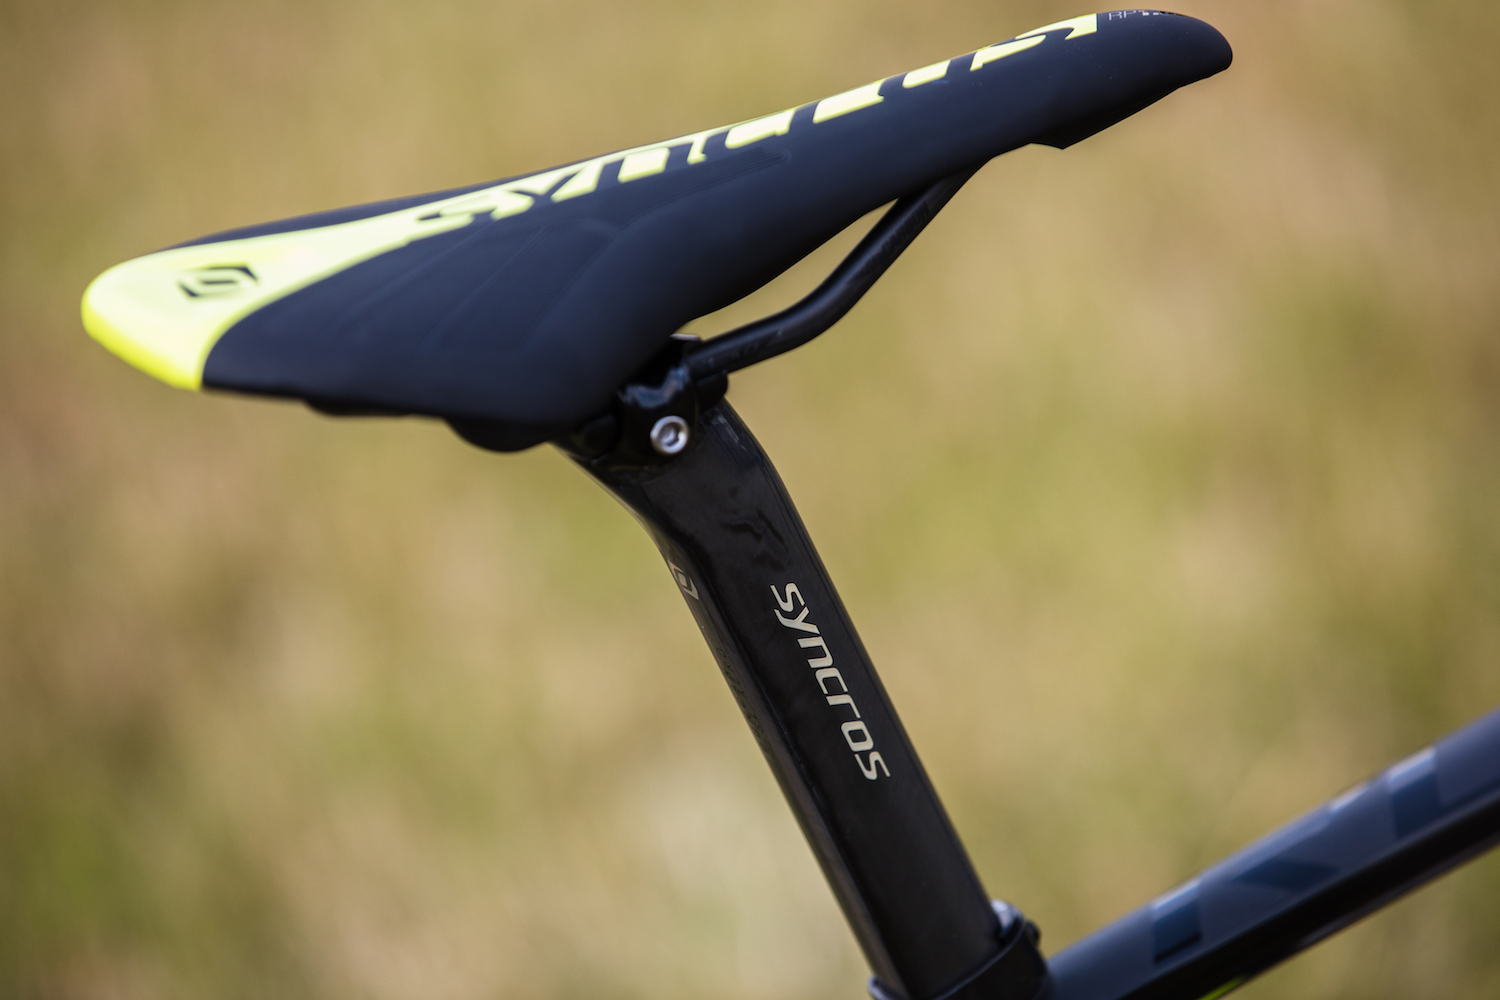 A saddle that is too high and is causing knee pain from cycling for the rider